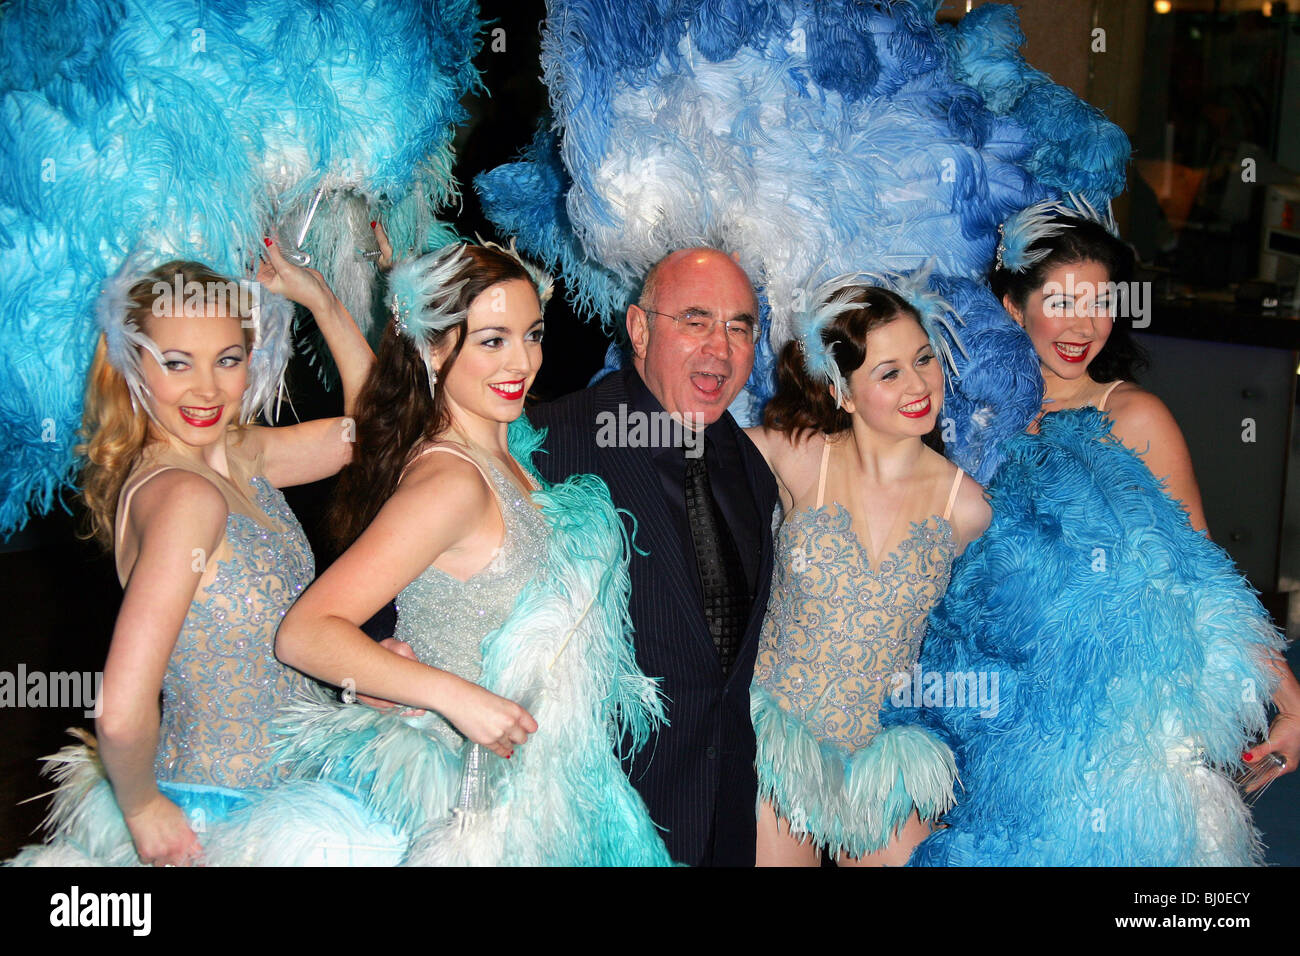 BOB HOSKINS ATTORE VUE WEST END Leicester Square Londra Inghilterra 23/11/2005 Foto Stock